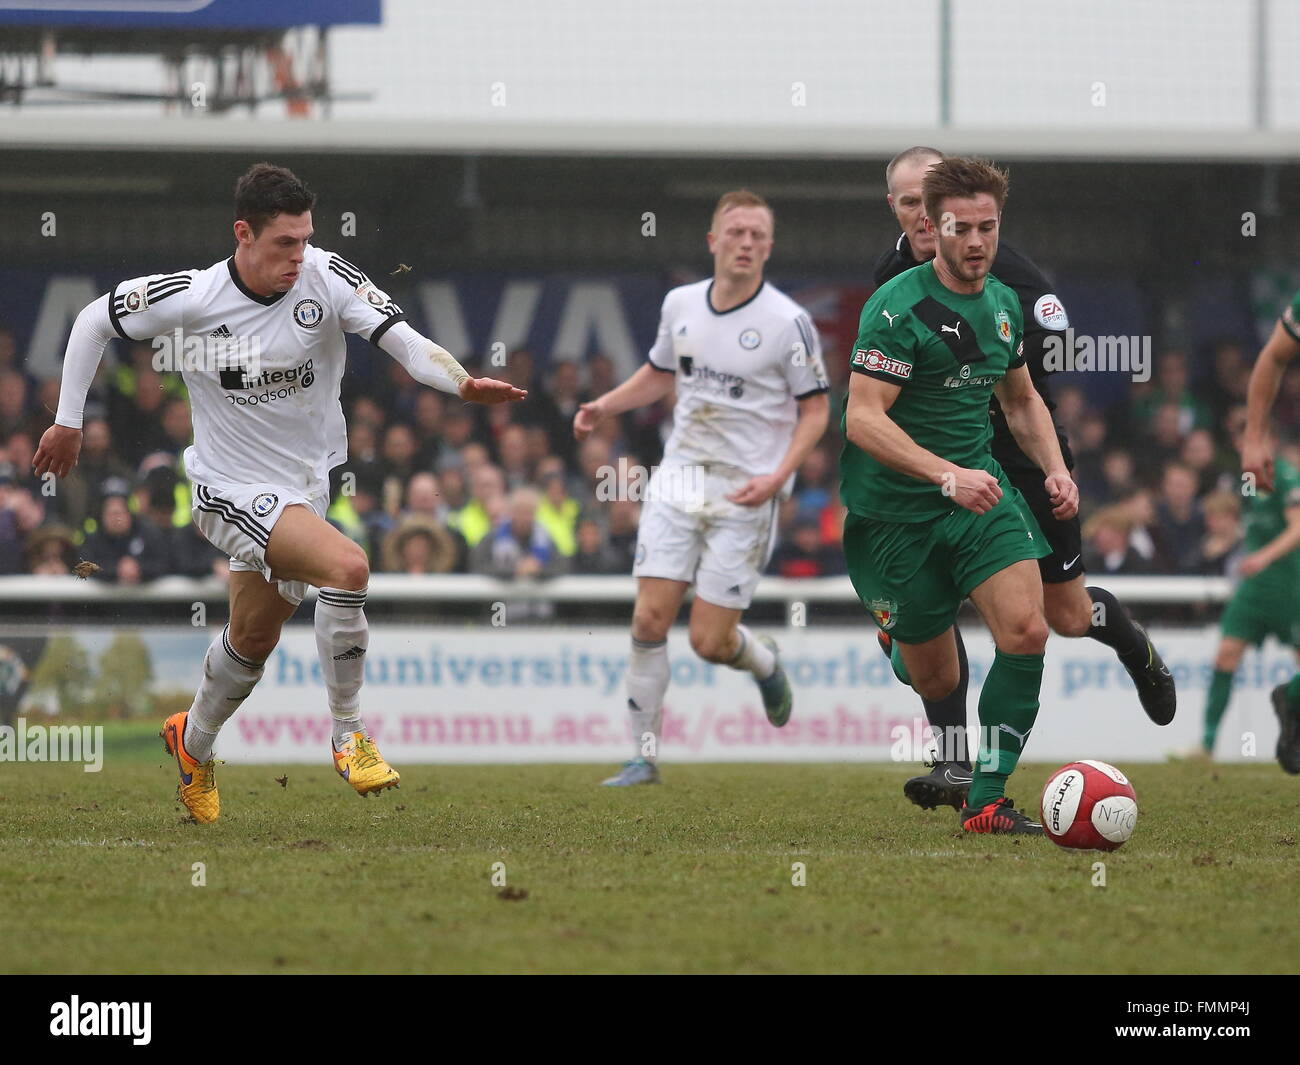 Nantwich, Cheshire. UK. 12th March, 2016. Nantwich Town lost 4-2 at home to FC Halifax Town in front of a crowd of 2078 in the FA Trophy Semi-Final 1st leg. Nantwich Town's Josh Hancock on the ball. Credit:  Simon Newbury/Alamy Live News Stock Photo